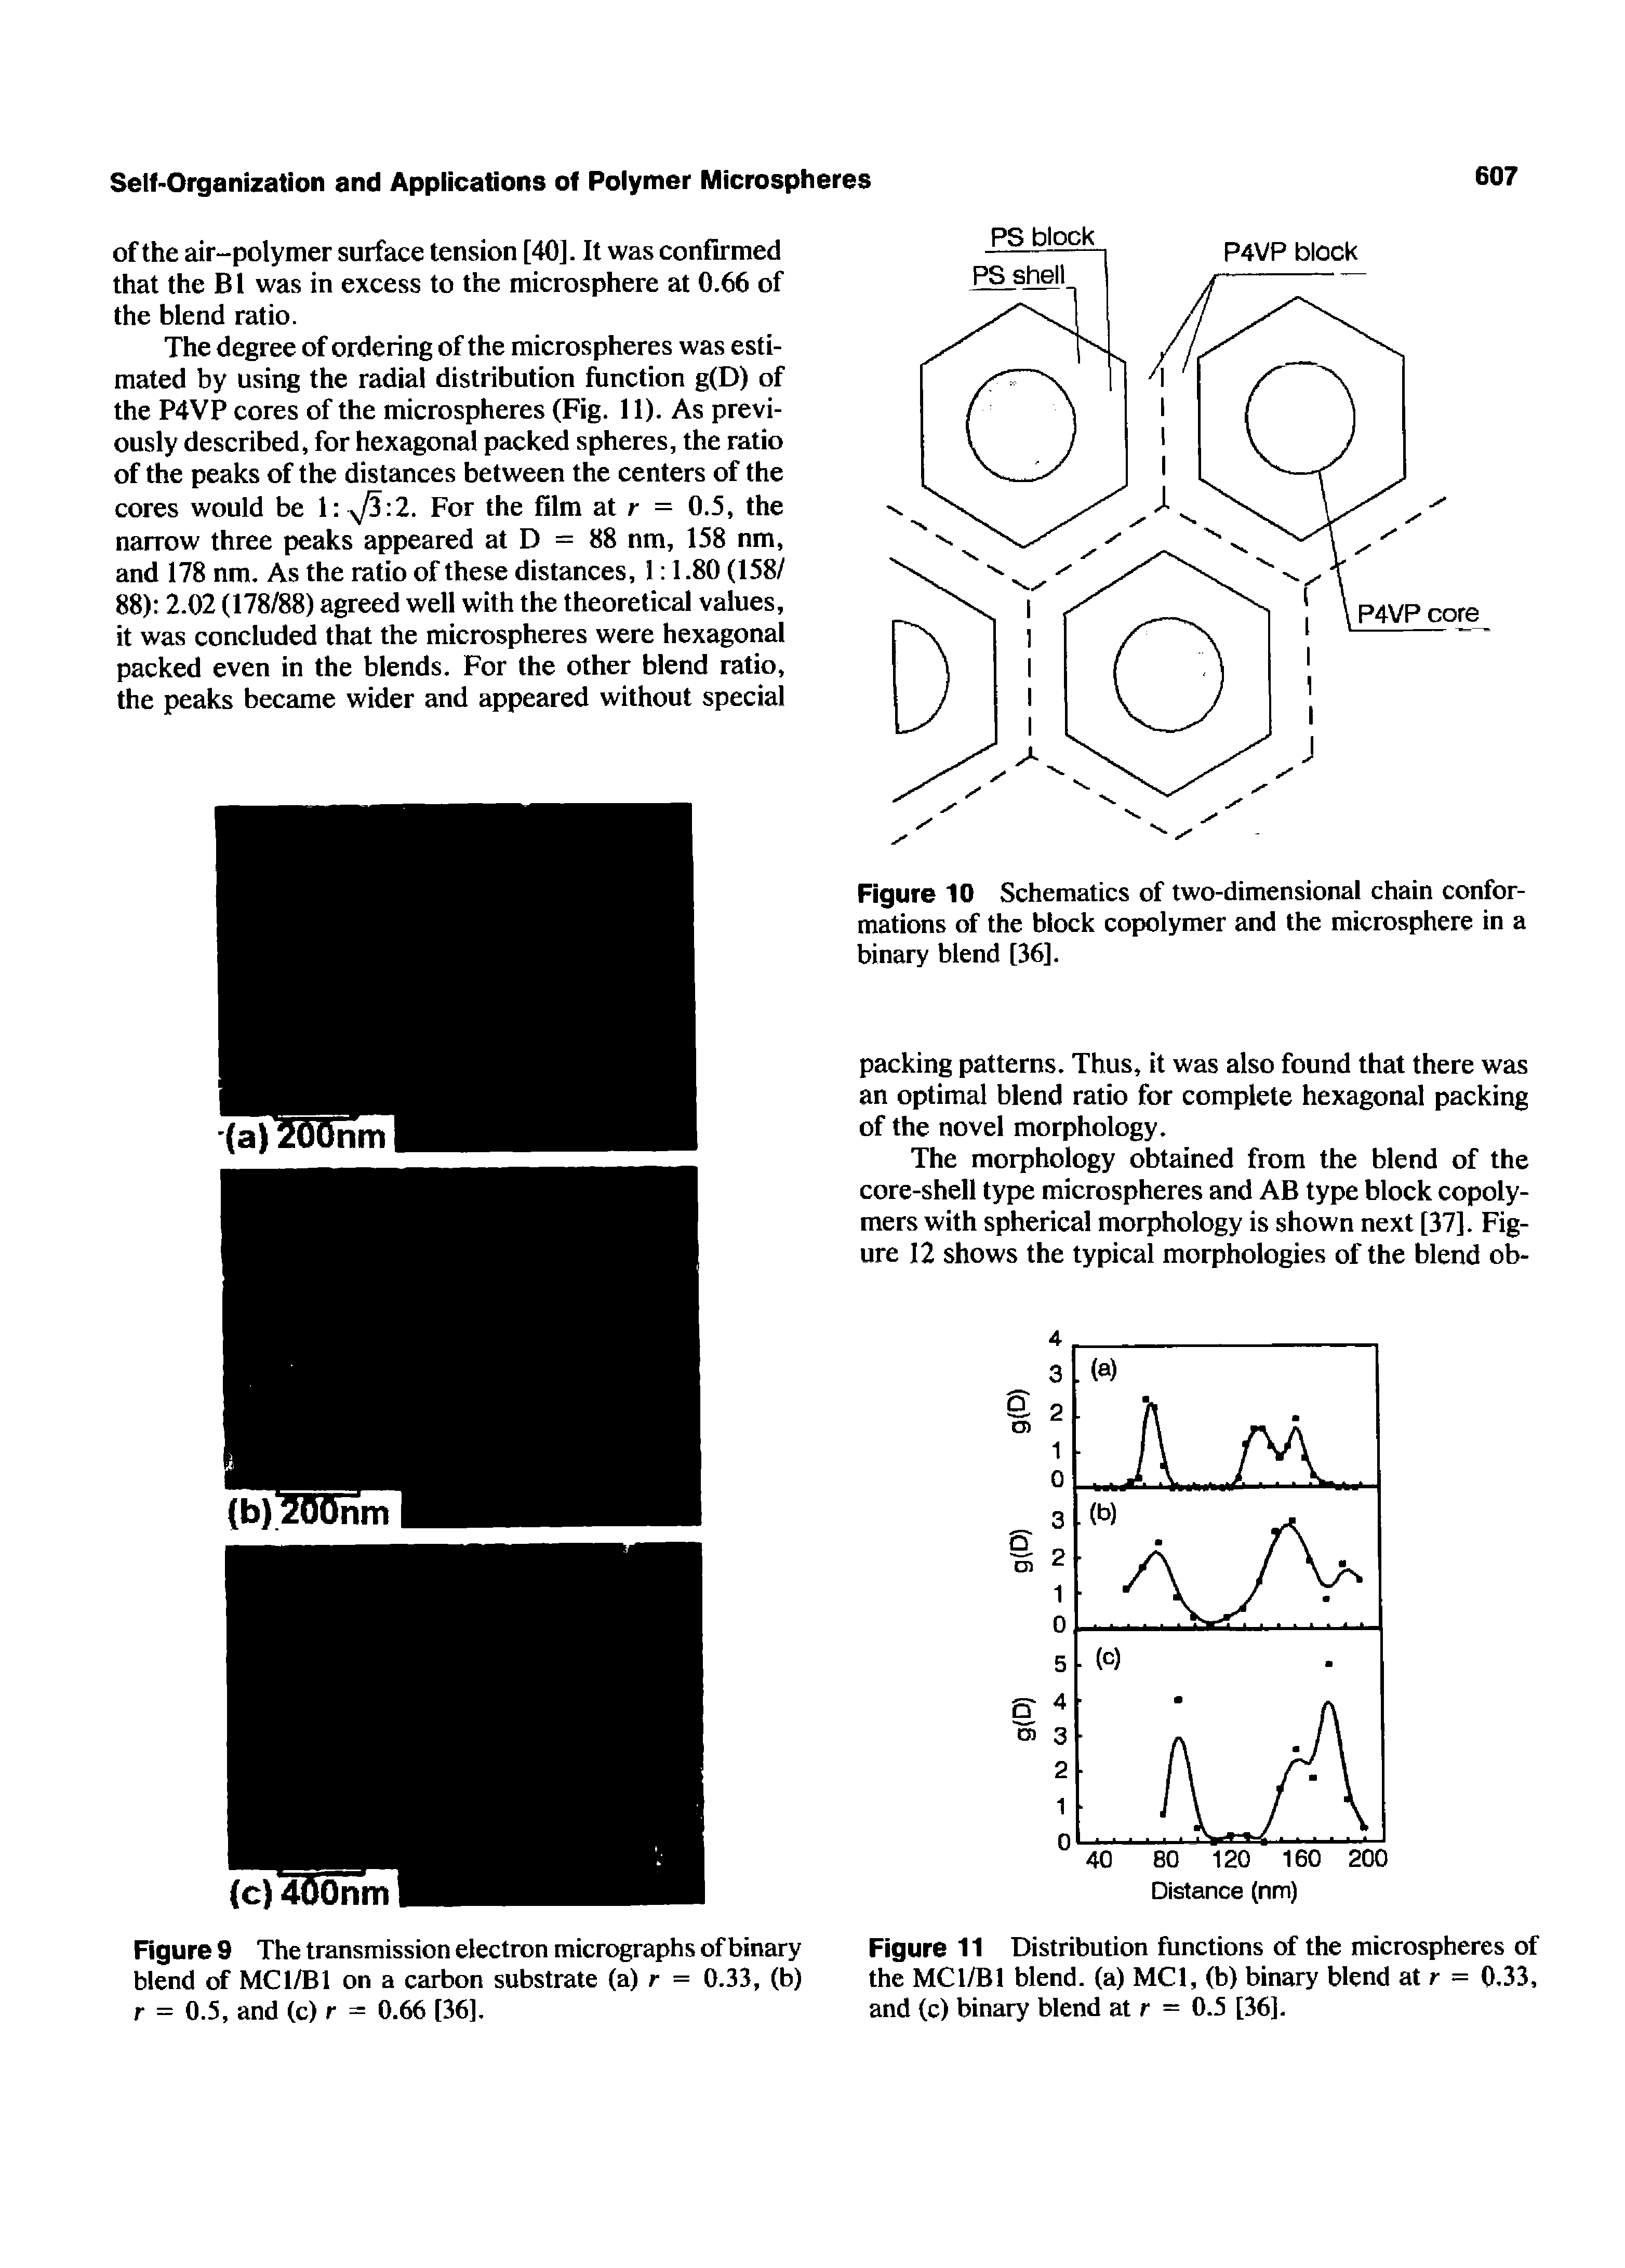 Figure 10 Schematics of two-dimensional chain conformations of the block copolymer and the microsphere in a binary blend [36].